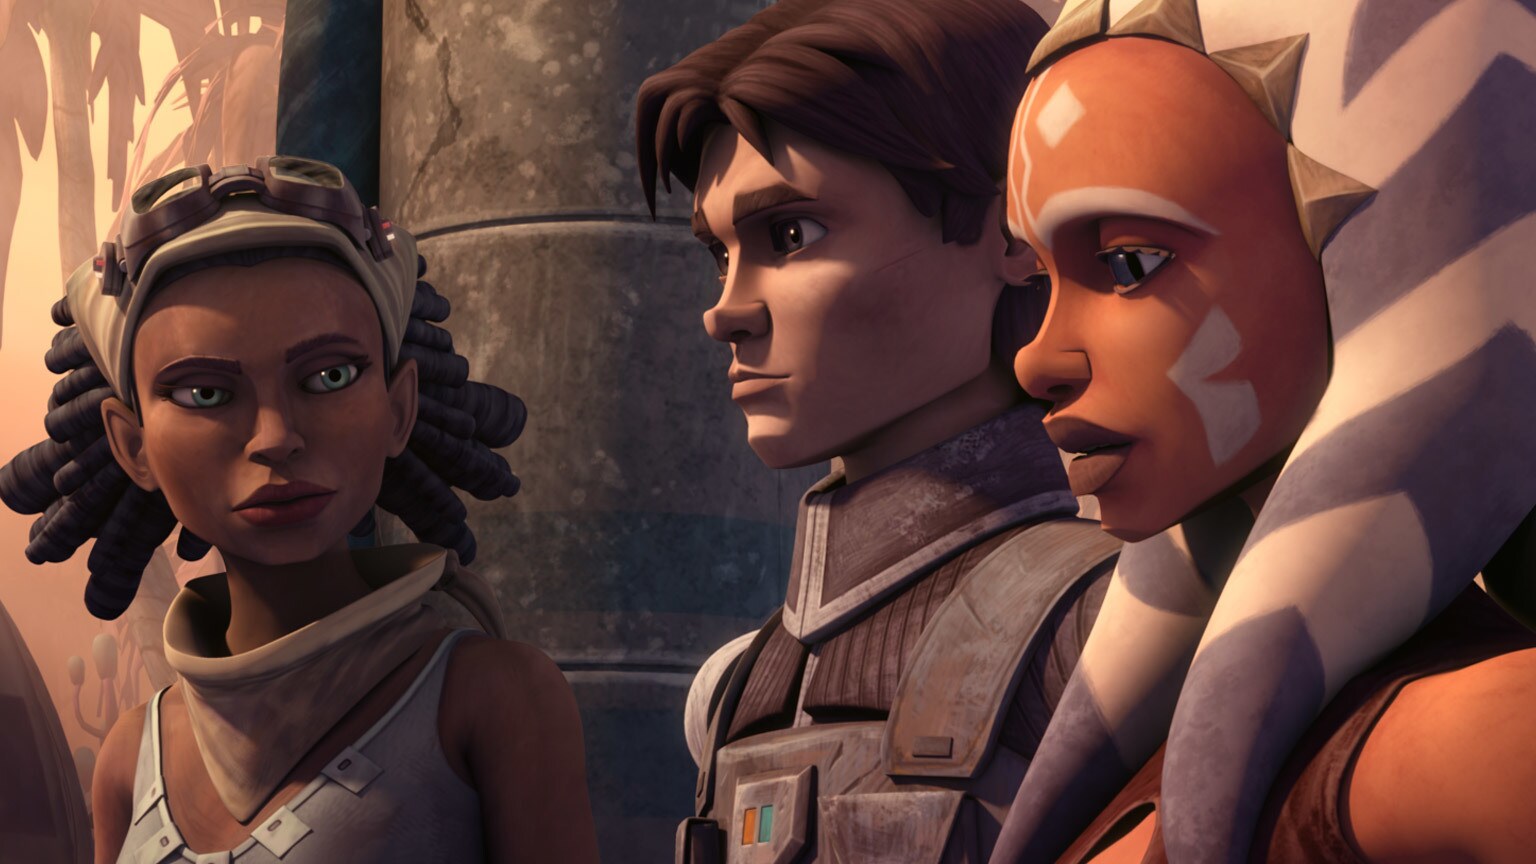 The Clone Wars Rewatch: Rebels and "A War on Two Fronts"